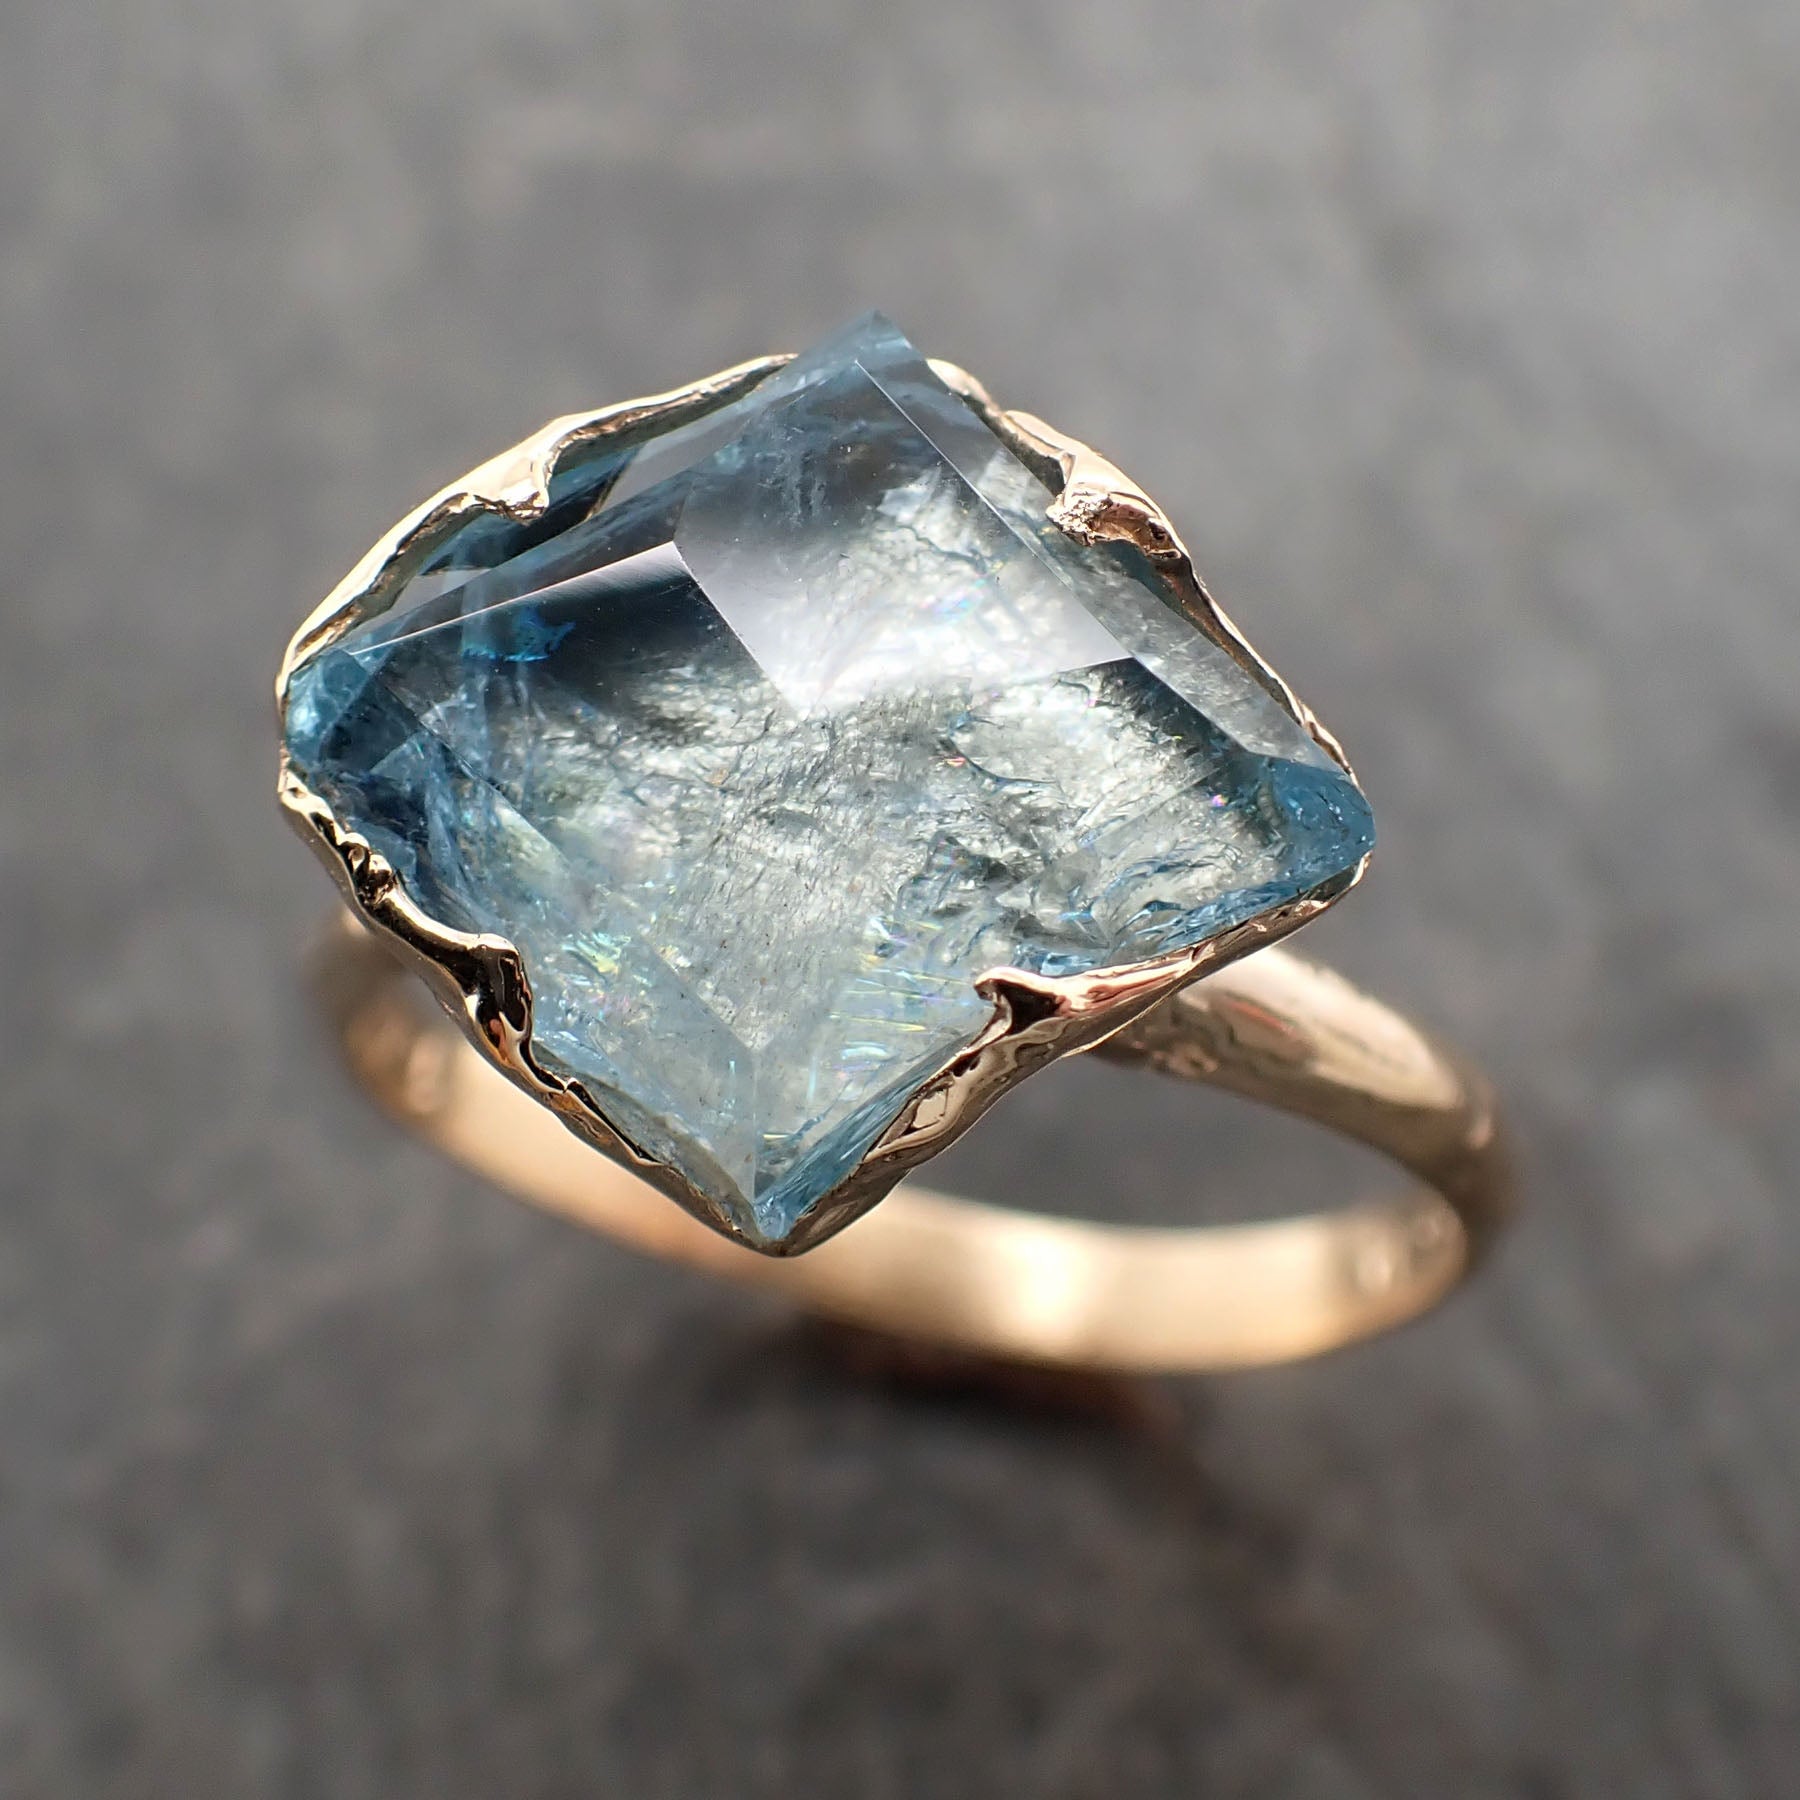 partially faceted aquamarine solitaire ring 18k gold custom one of a kind gemstone ring bespoke byangeline 2381 Alternative Engagement